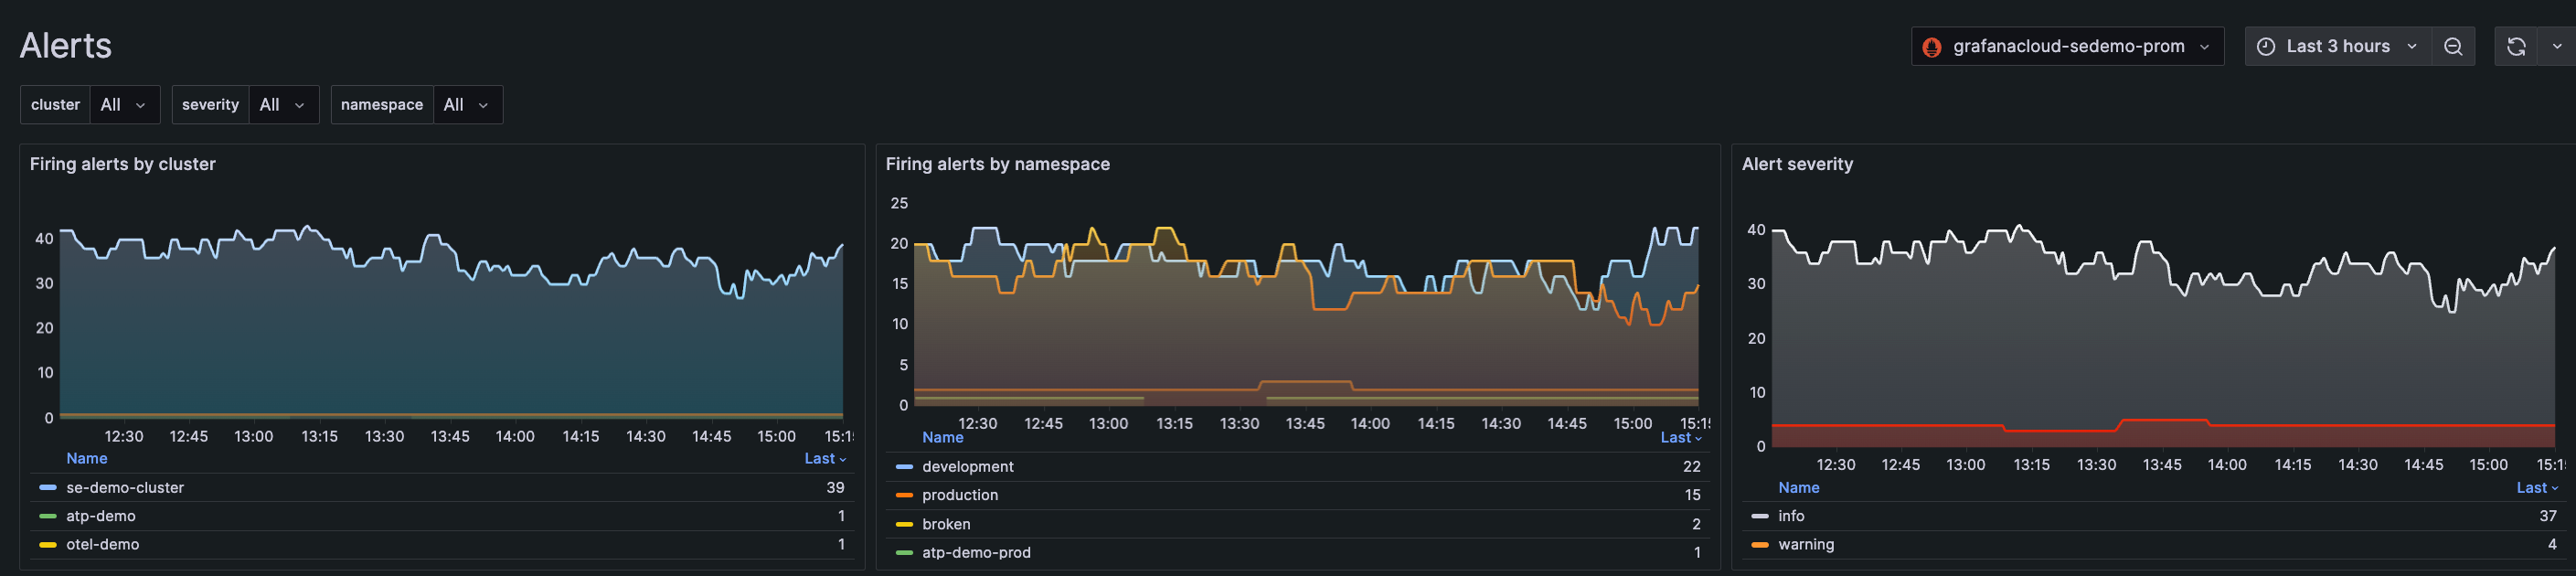 Alert graphs for all alerts by Cluster, namespace, and alert severity for the last three hours